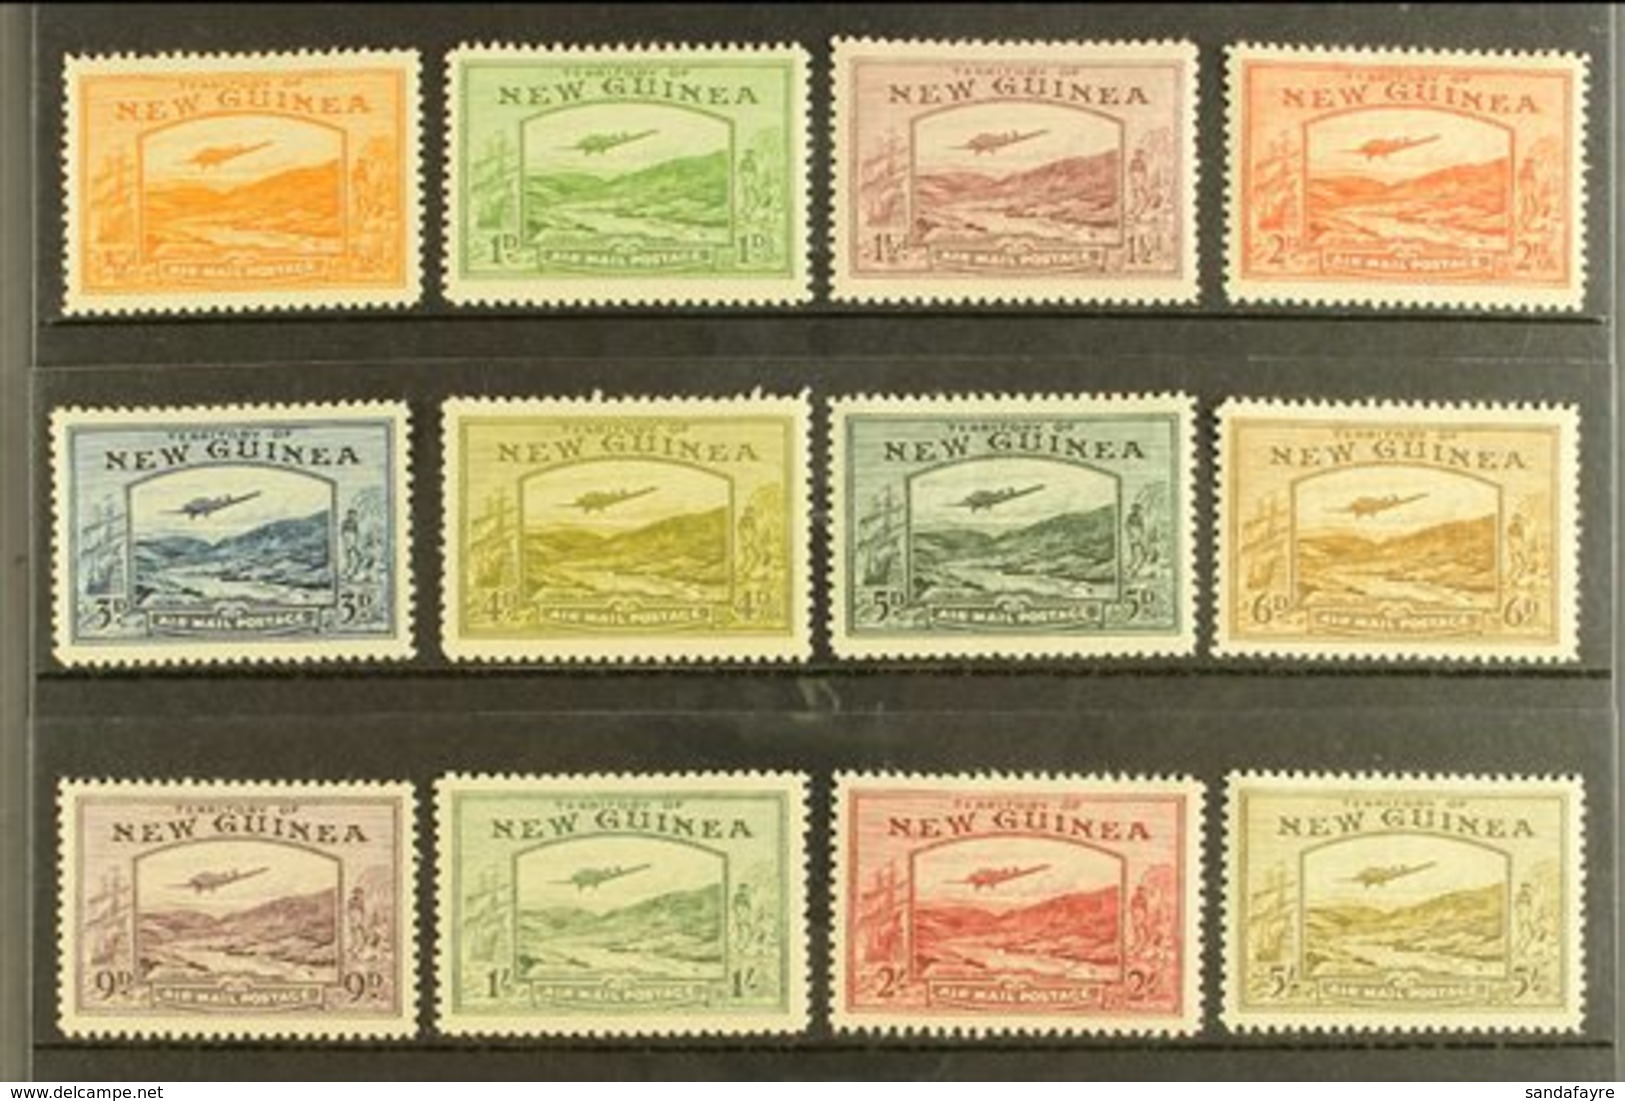 1939  Bulolo Goldfields Air Set Complete From ½d To 5s, SG 212/223, Very Fine Mint. (12 Stamps) For More Images, Please  - Papua New Guinea